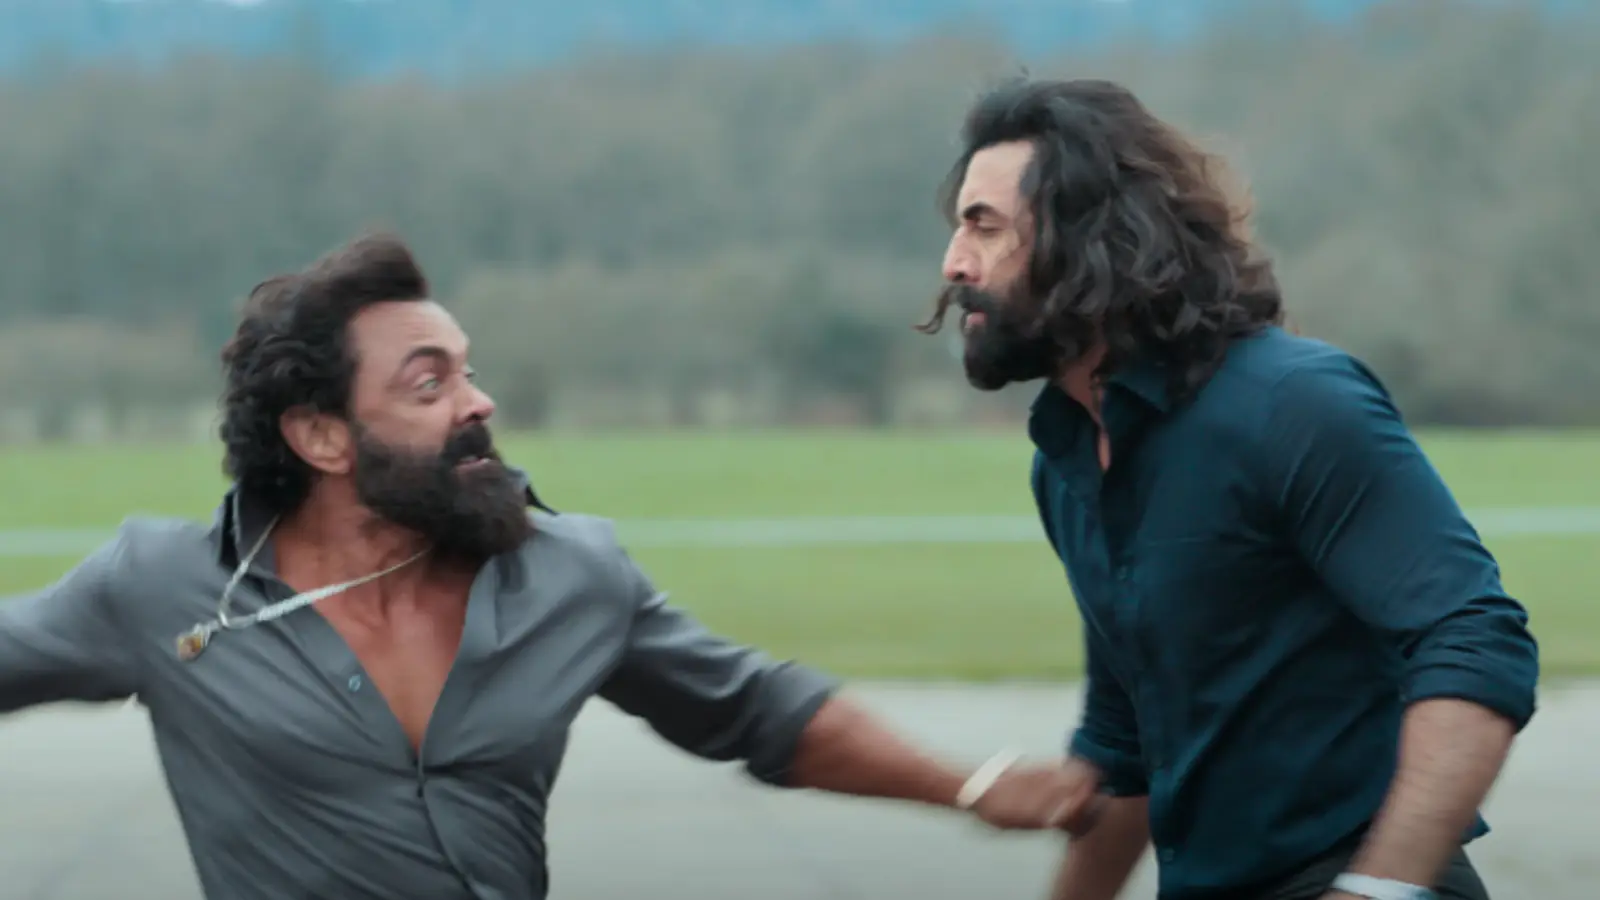 Animal Trailer Review: Ranbir Kapoor and Bobby Deol star in an intense revenge saga, delivering the ultimate cinematic thrill